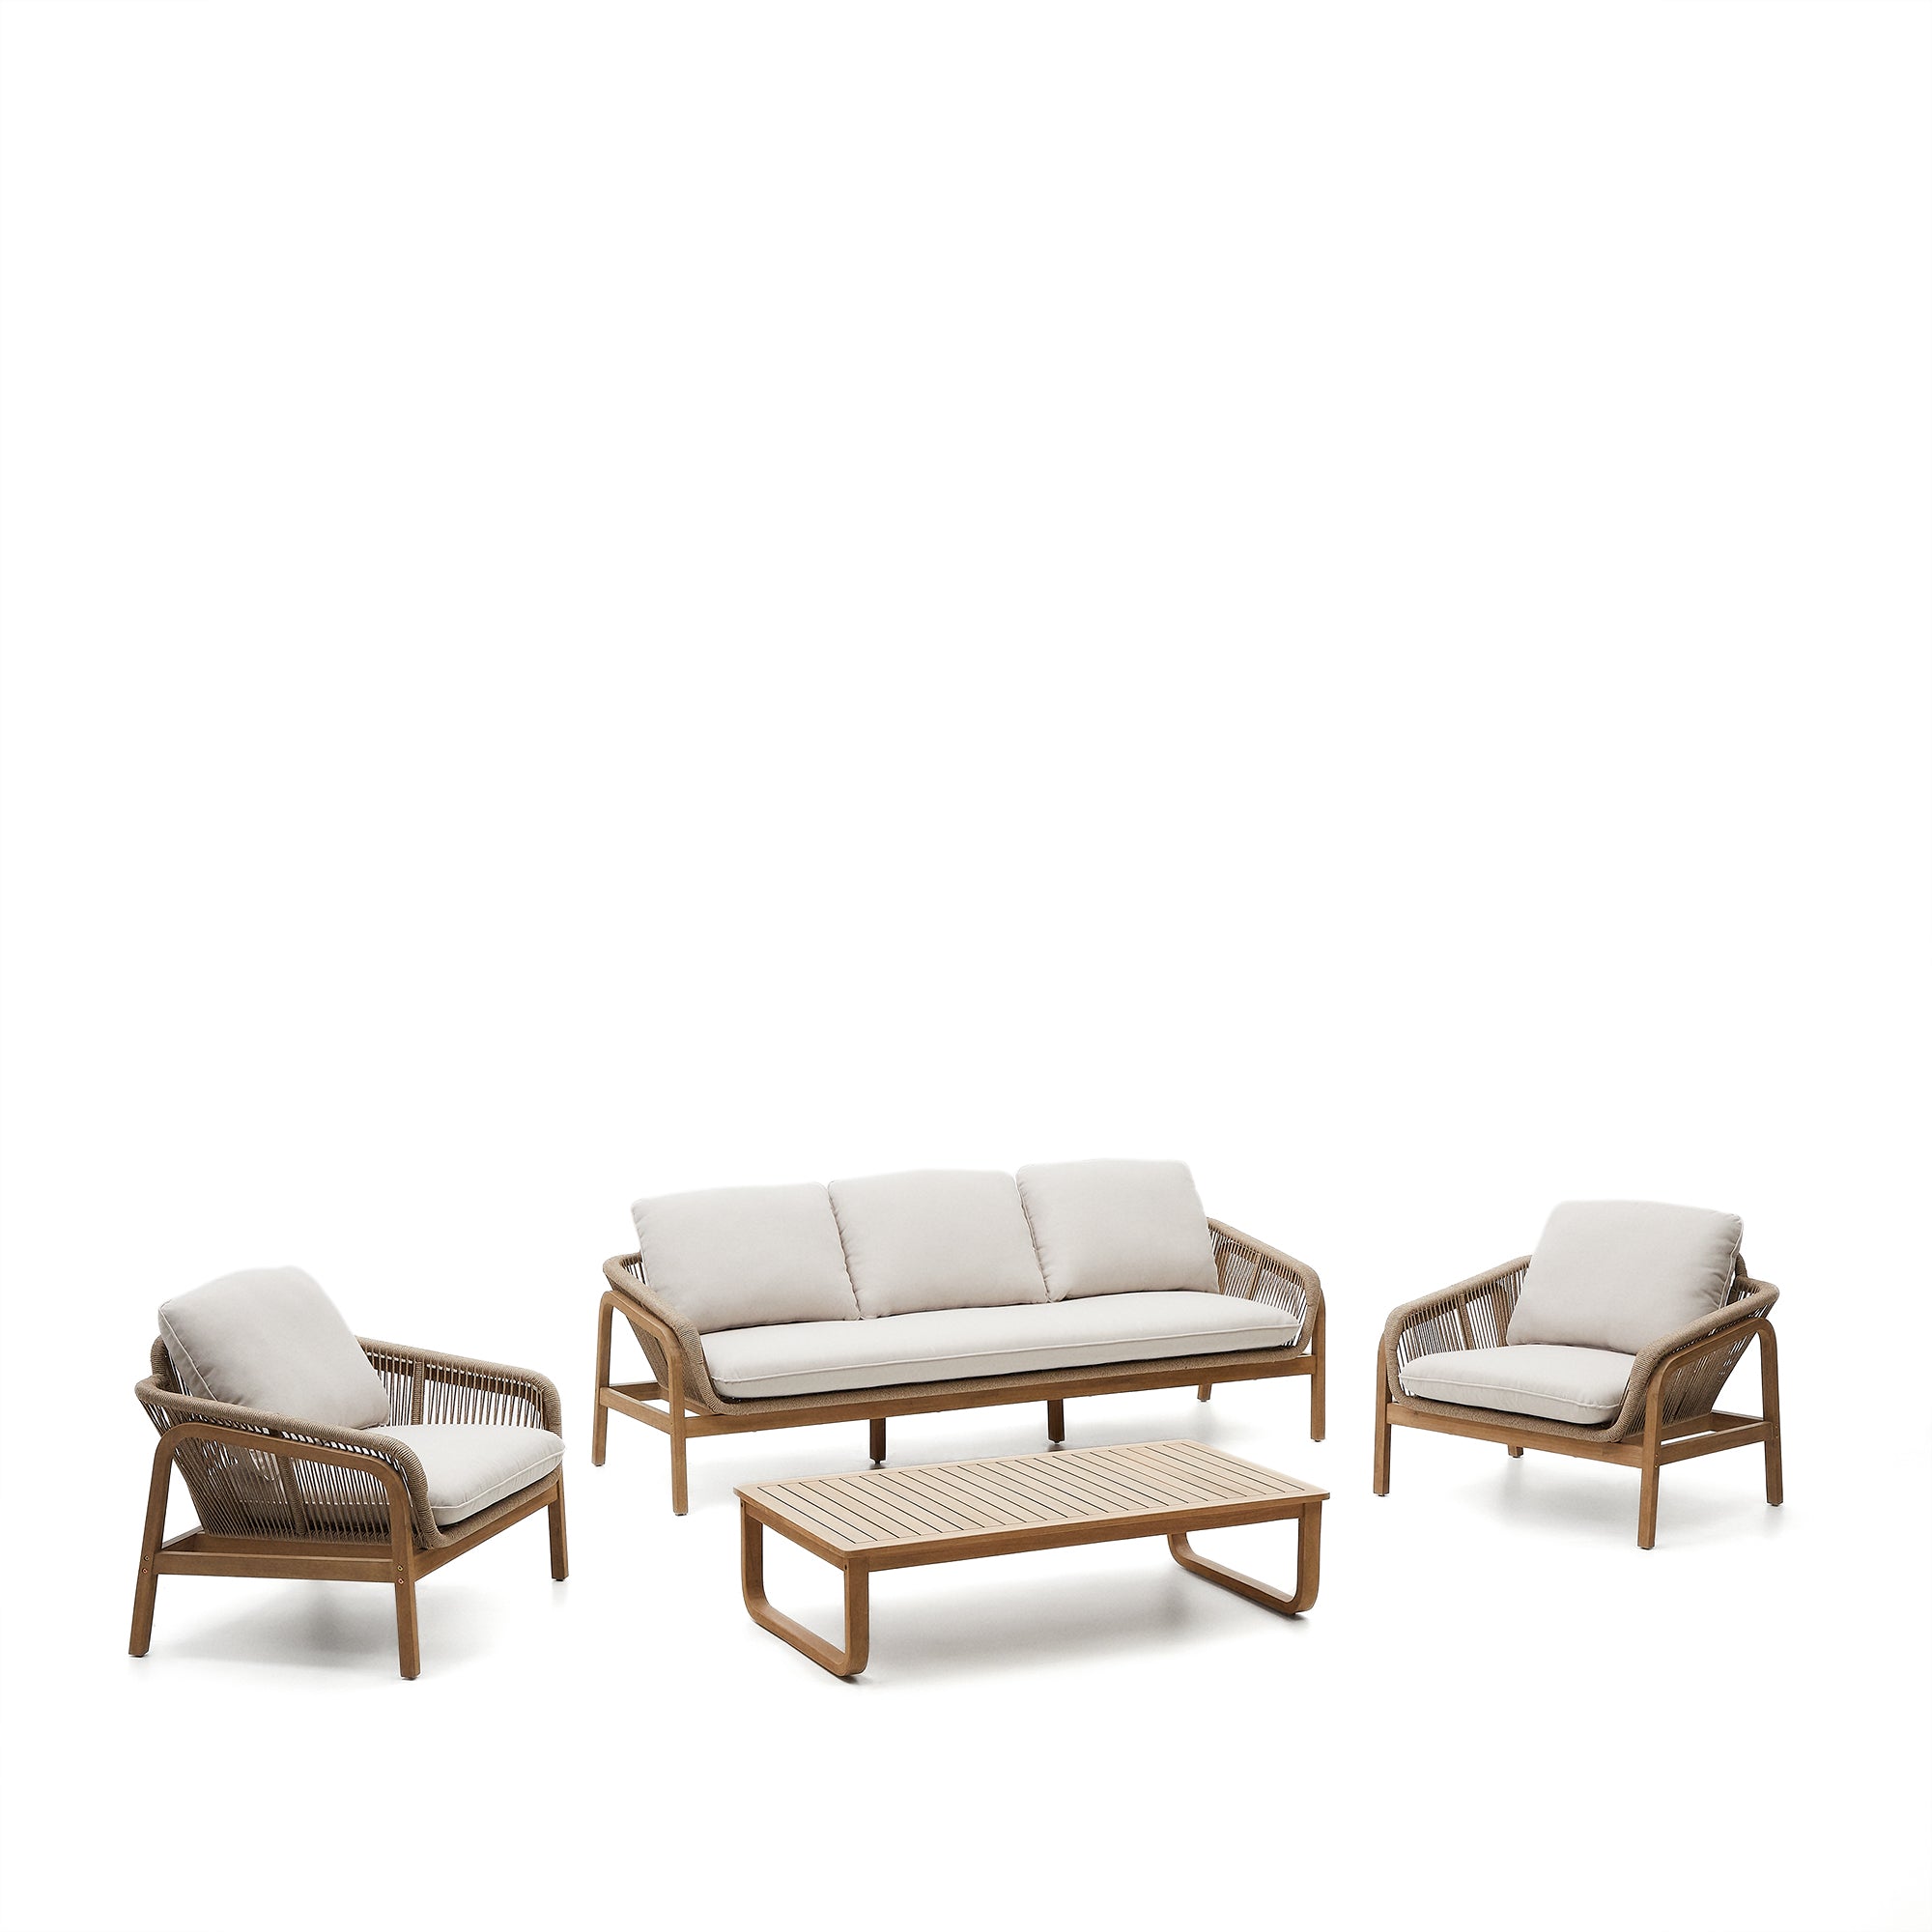 Vellana set: 3-person sofa, 2 armchairs and coffee table made of 100% FSC certified solid acacia wood